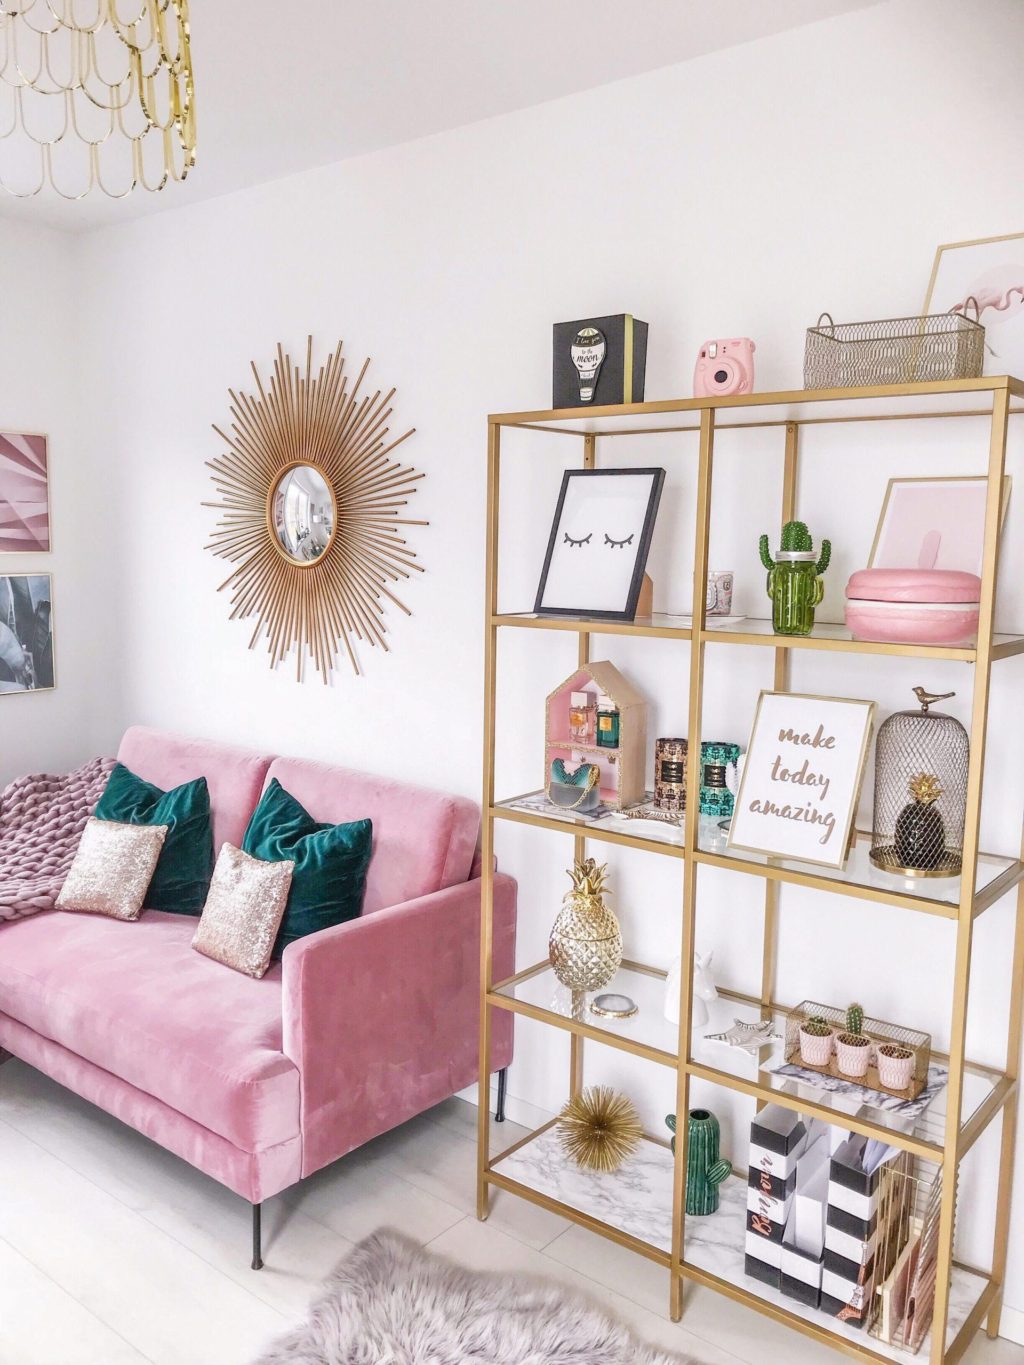 Soft-Pinks-2-1024x1365 Top 10 Outdated Home Decorating Trends to Avoid in 2022